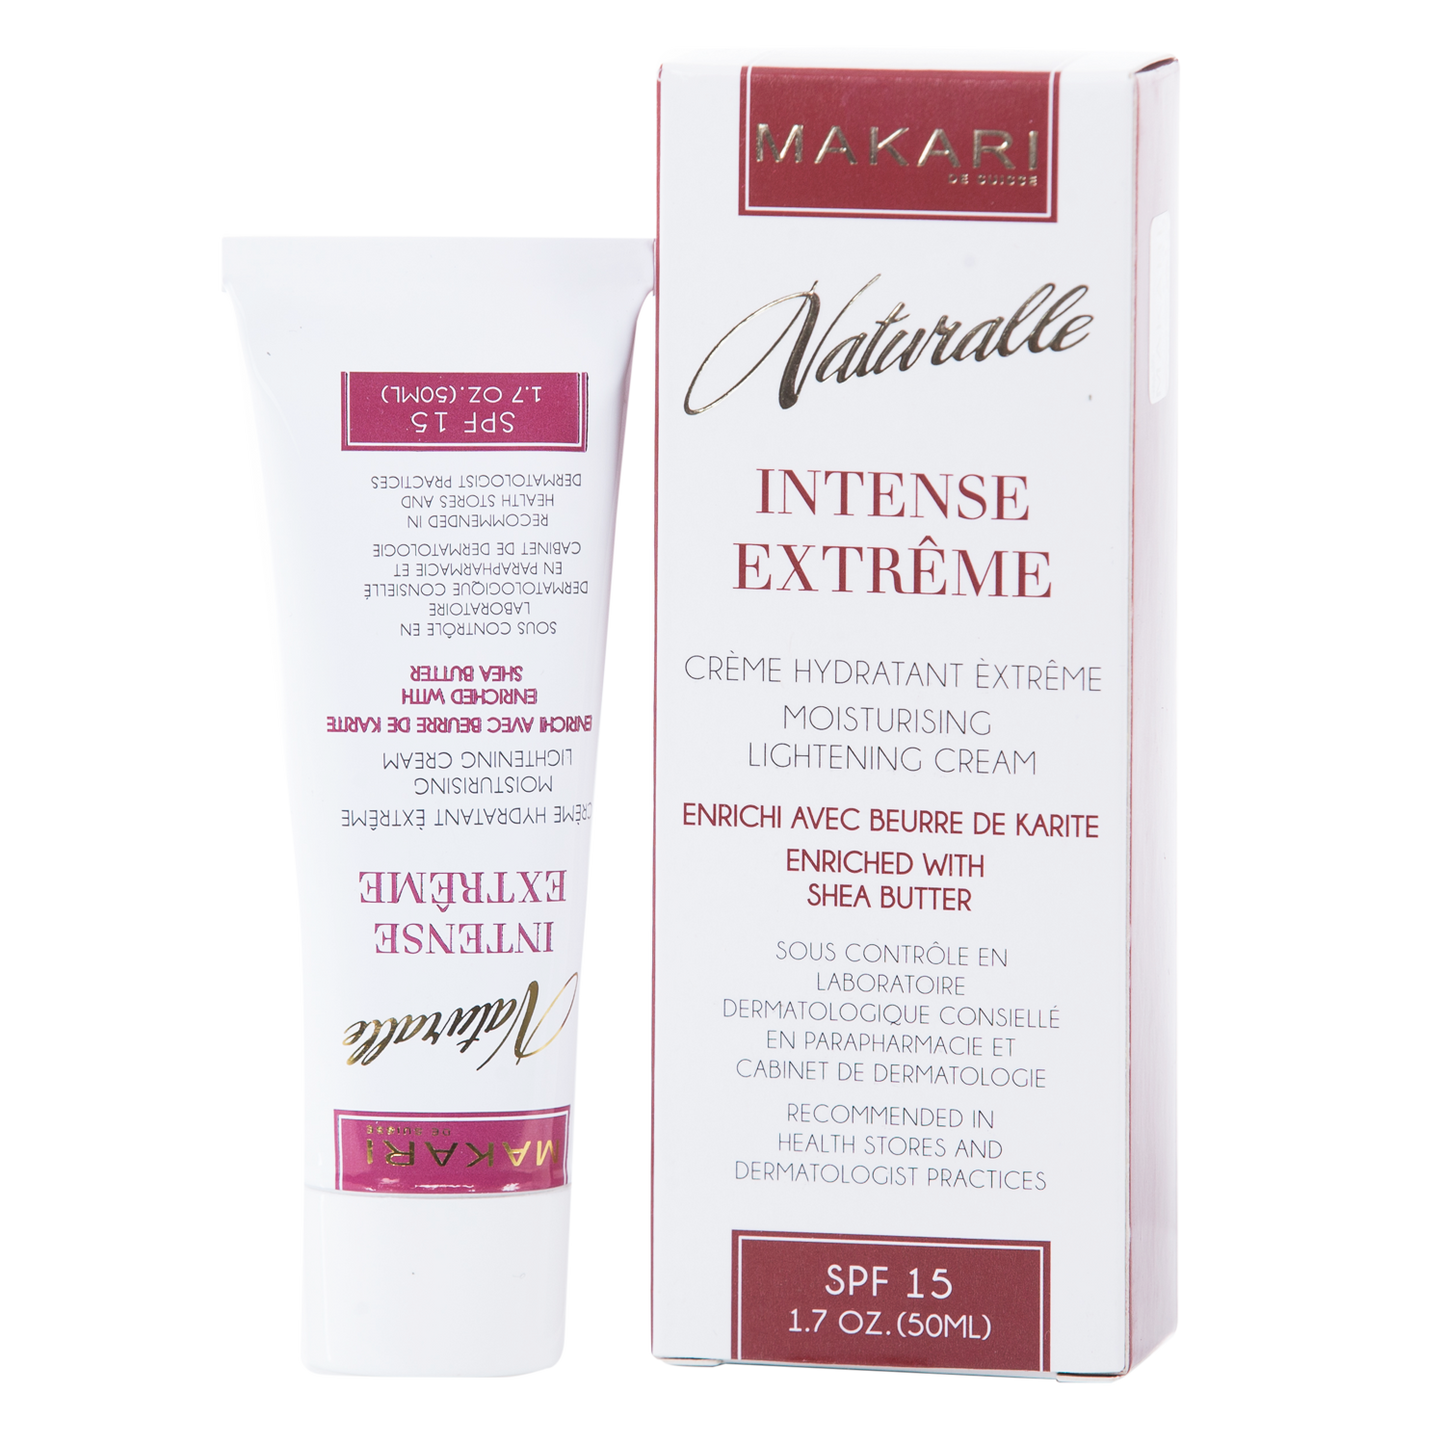 Makari Naturalle Intense Extreme Lotion with Box